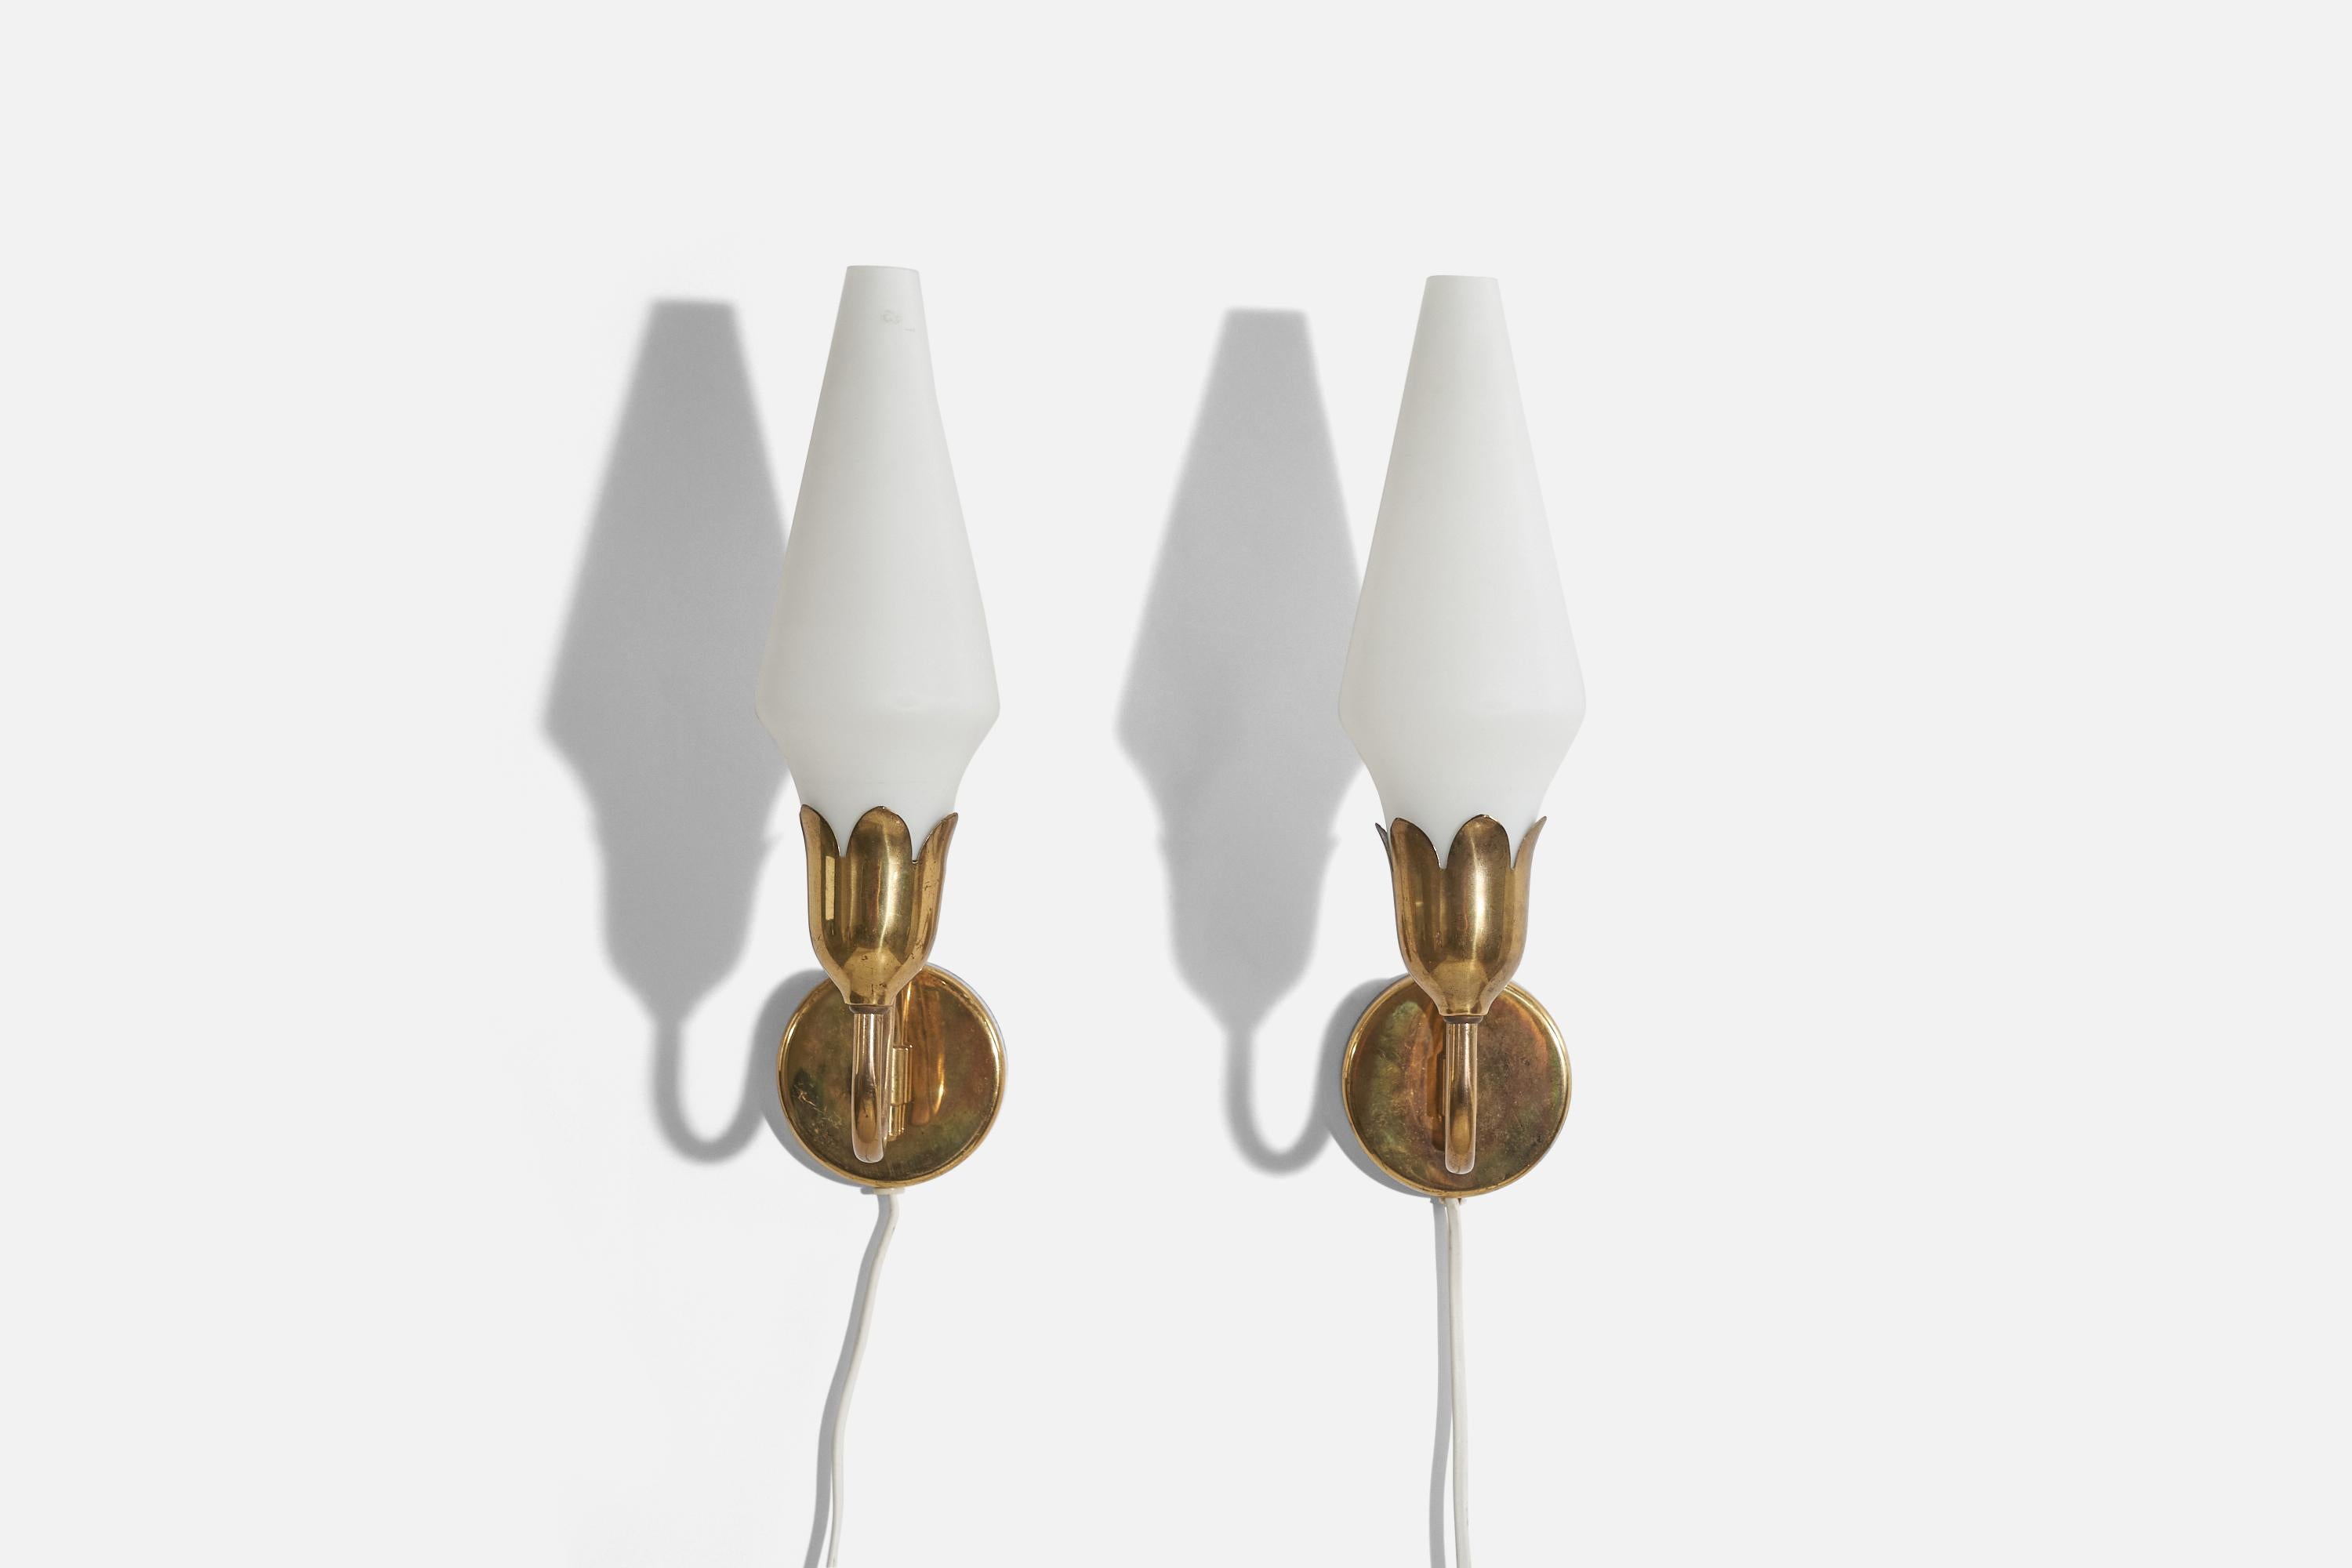 A pair of brass and glass wall lights designed and produced by Fog & Mørup, Denmark, c. 1950s.

Dimensions of the back plate (inches) : 3.4375 x 3.4375 x 0.75 (H x W x D).